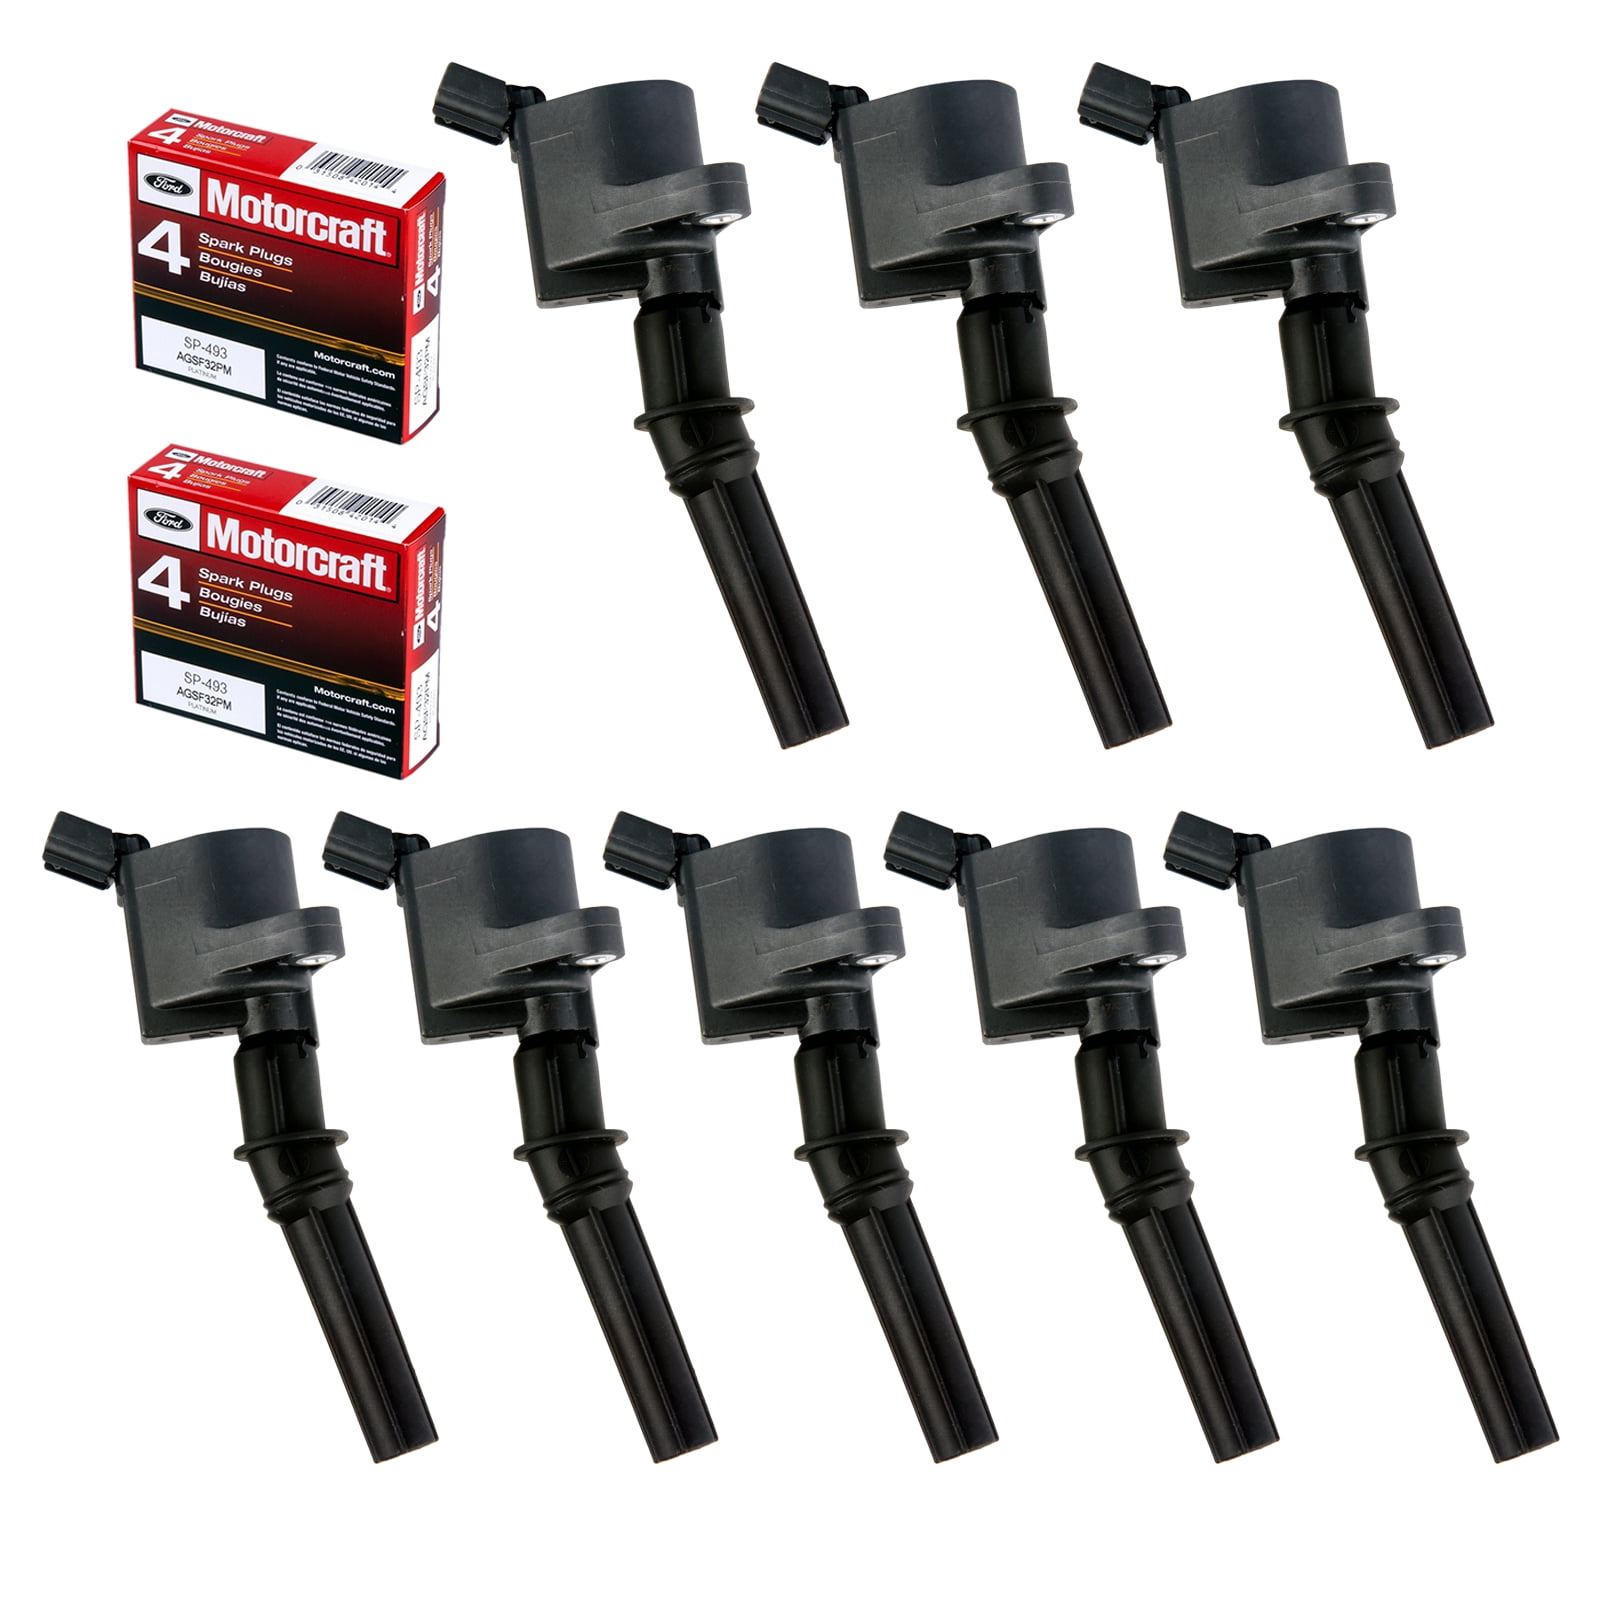 Motorcraft Spark Plugs For 2000-07 Ford Mercury Details about   Delphi Ignition Coils 3 3 + 